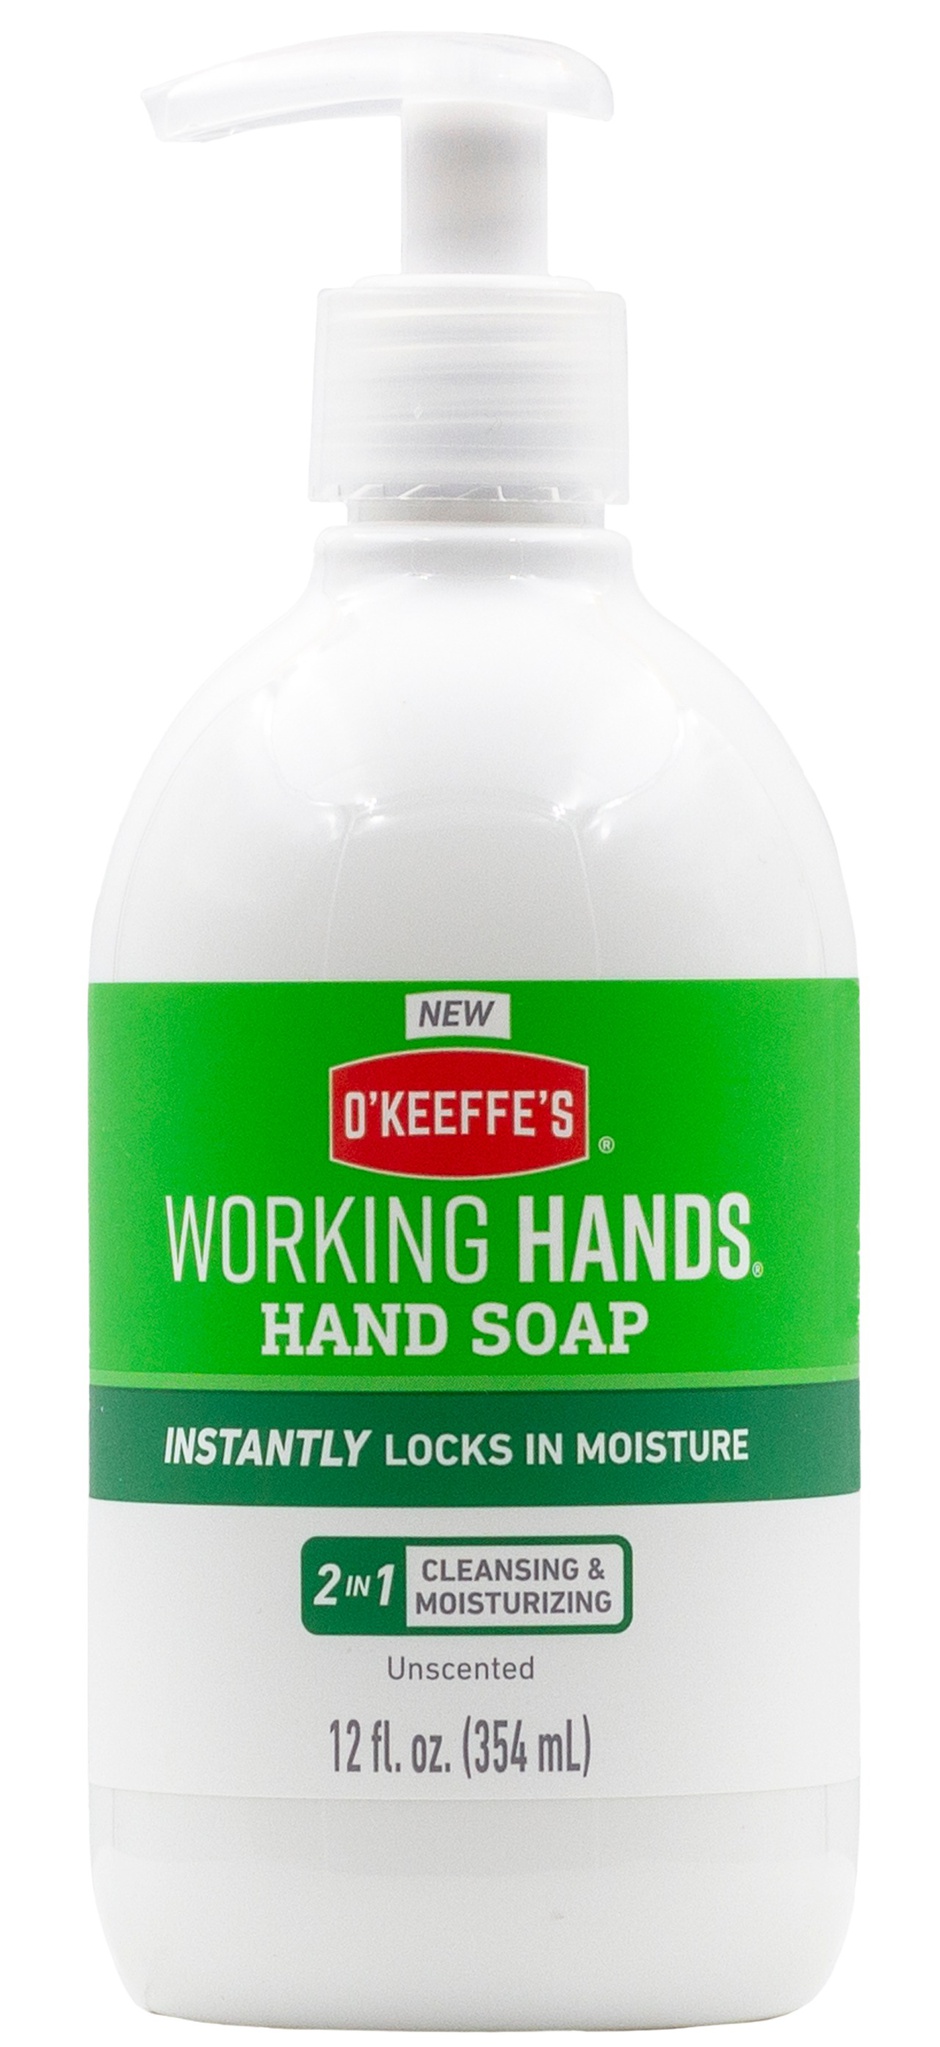 O’Keeffe’s Working Hands Hand Soap Unscented